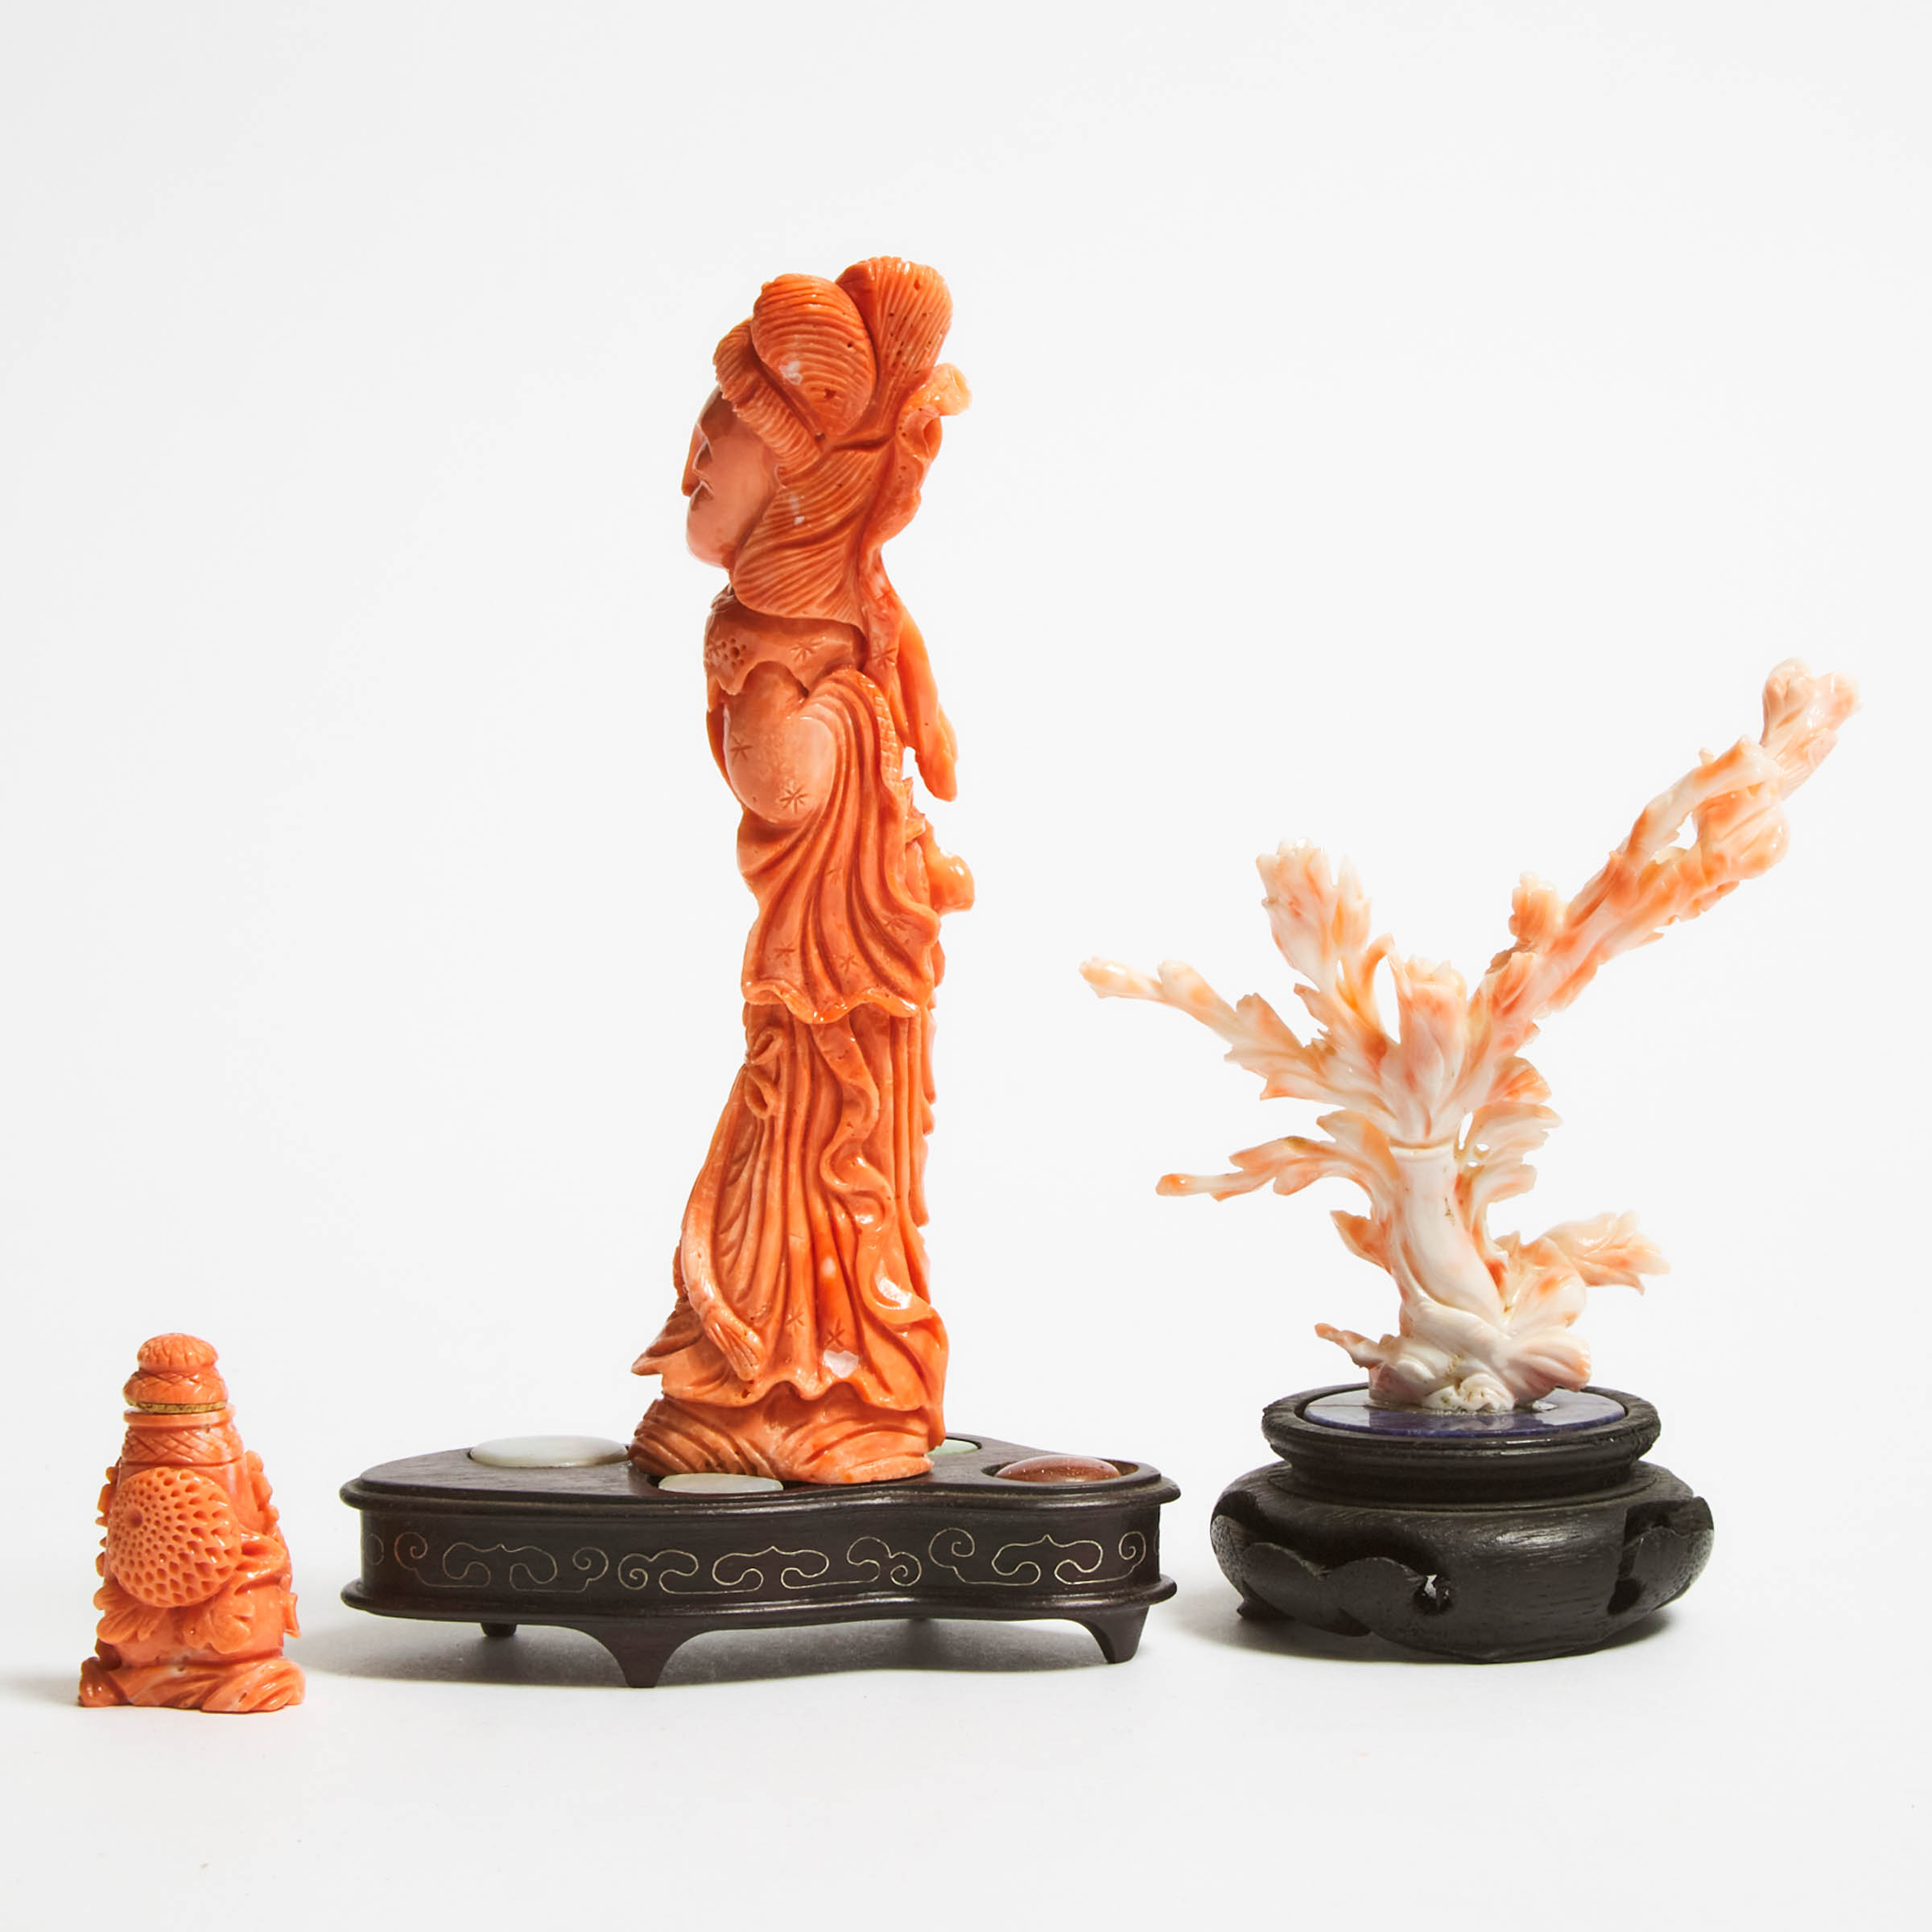 A Group of Three Coral Carvings, Late Qing/Republican Period